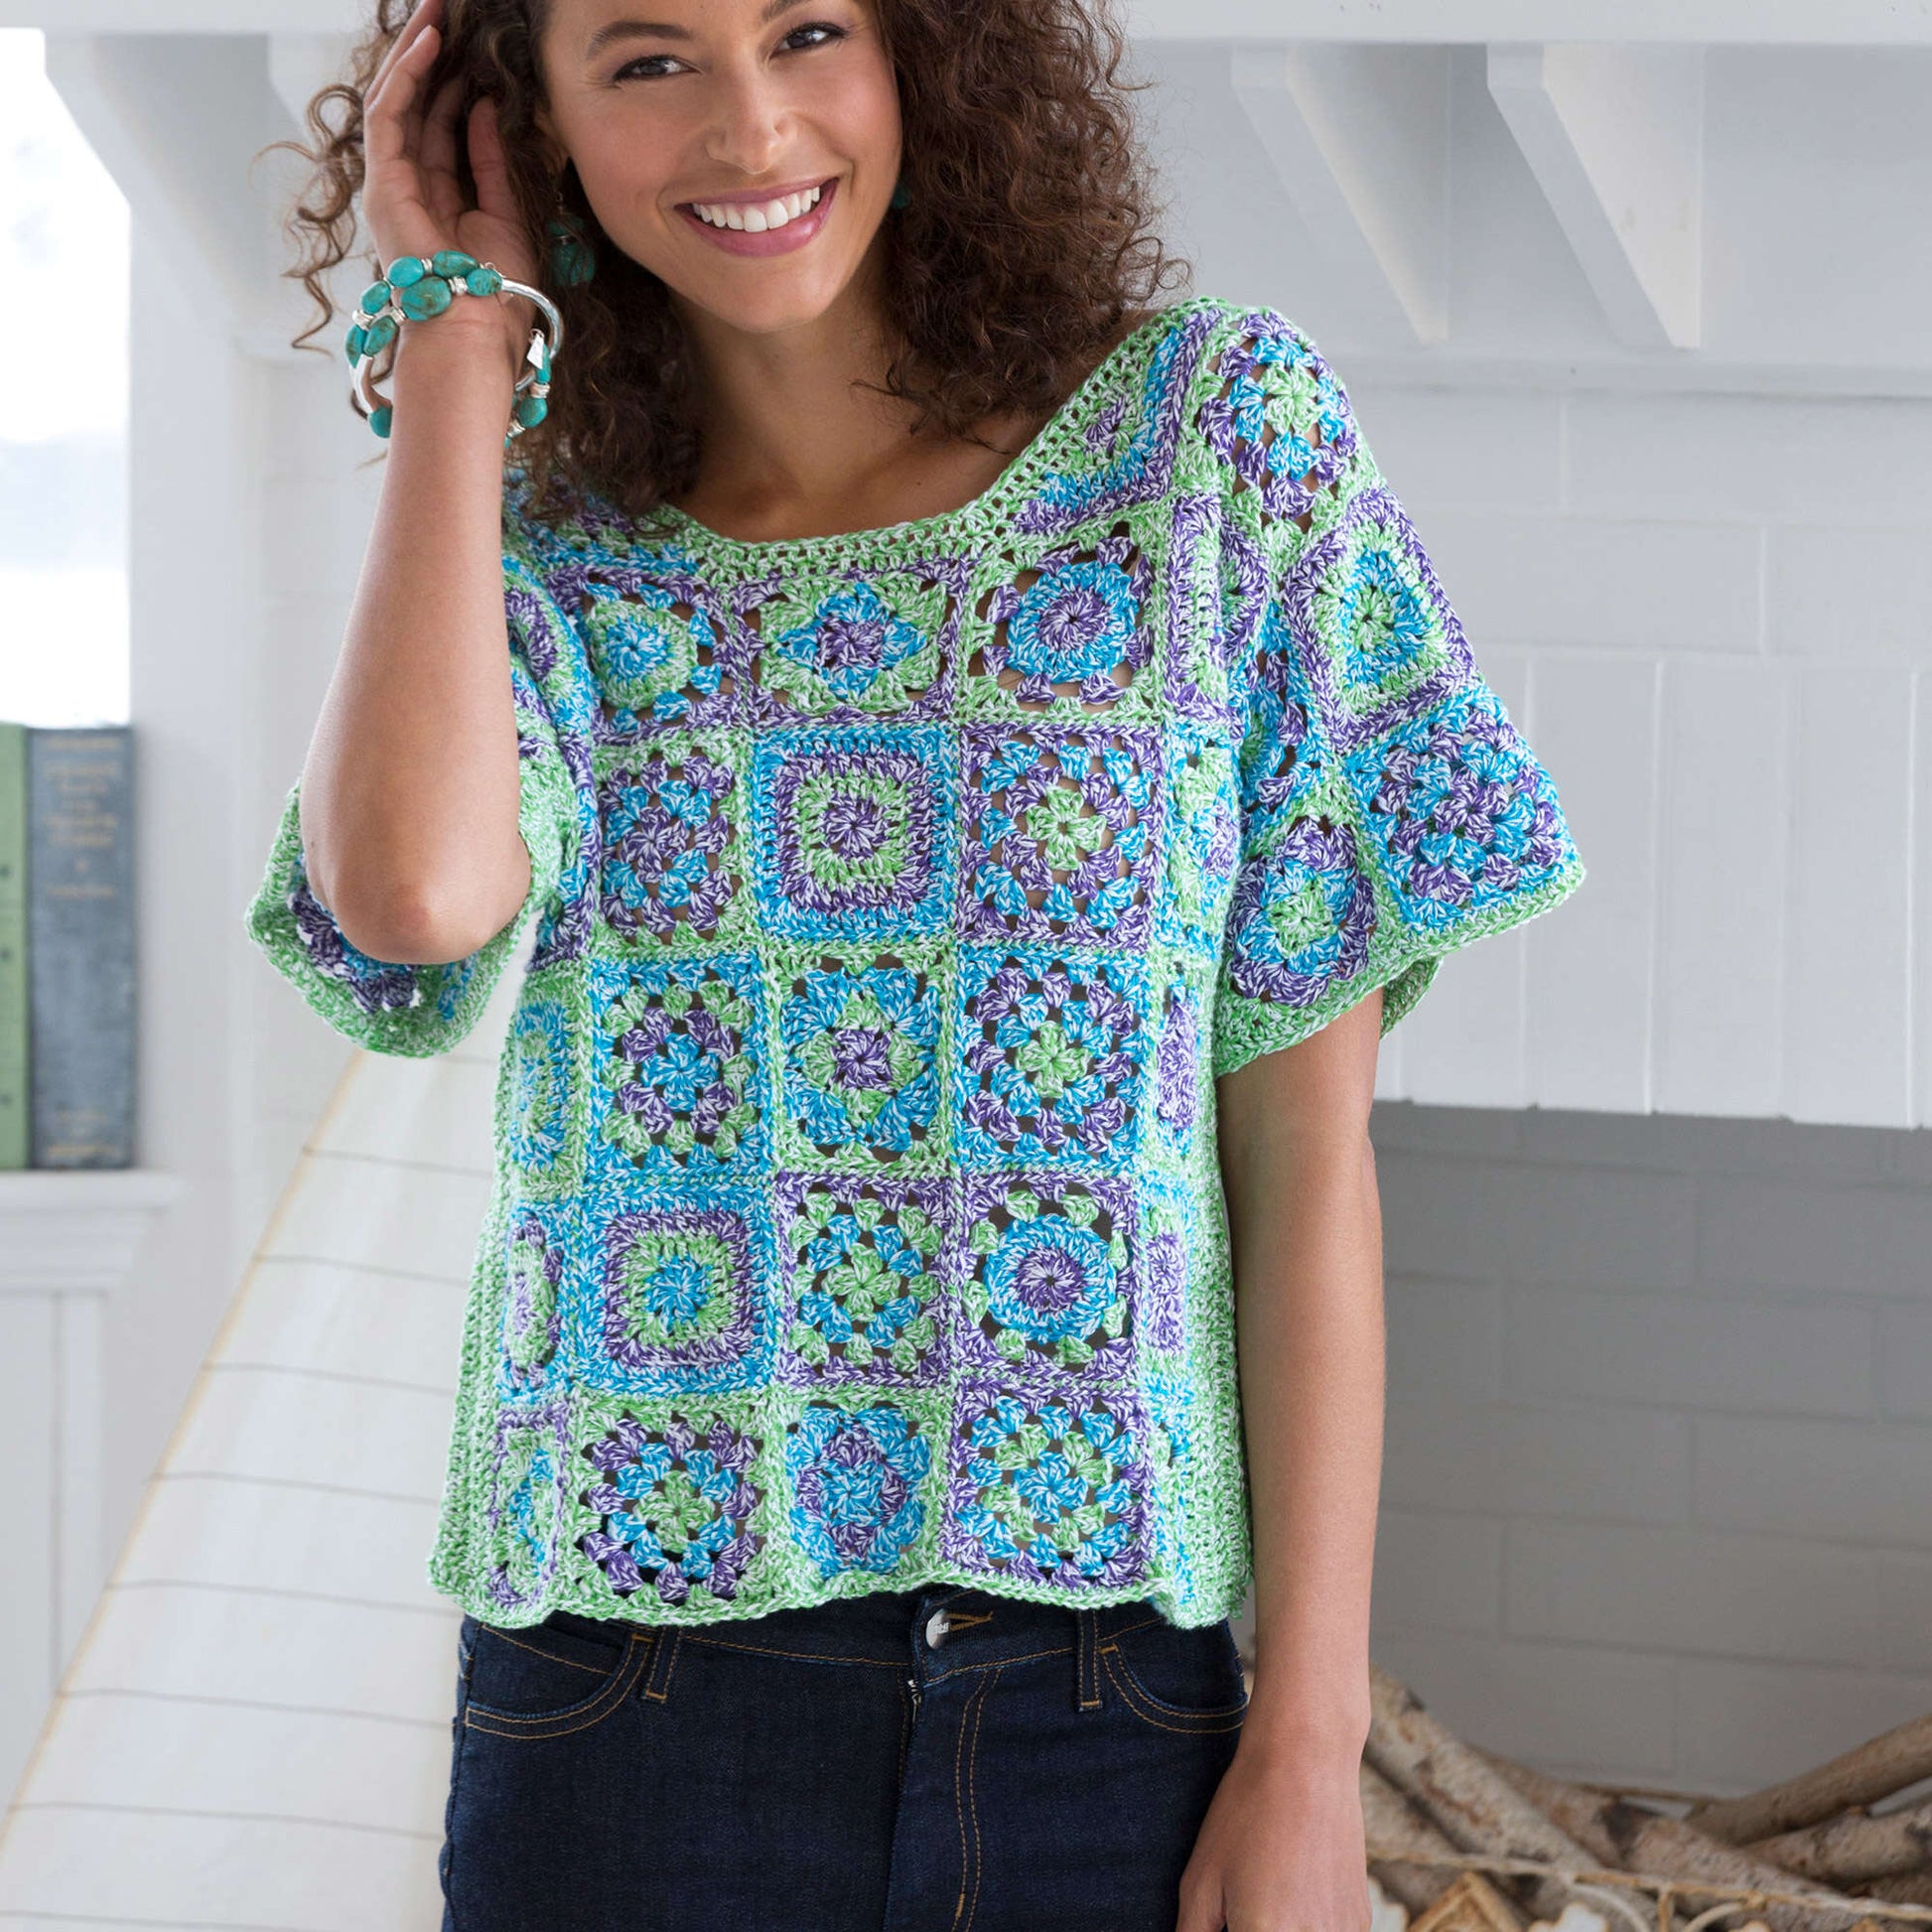 Aunt Lydia's Crafty Crochet Top Crochet Top made in Aunt Lydia's Baker's Cotton yarn